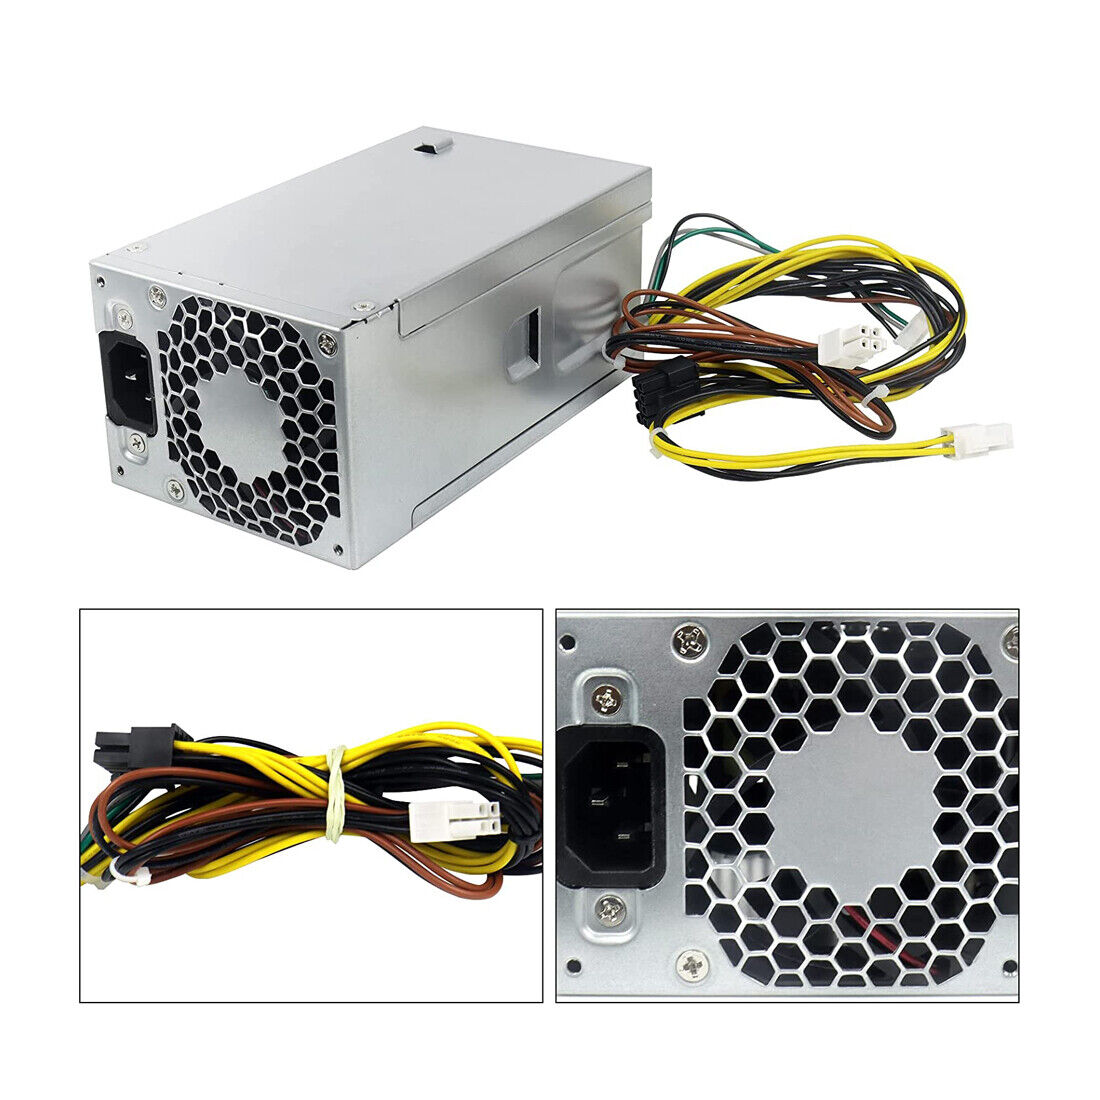 New Fors HP 400W 280 288 480 600 800 G3 G4 Power Supply PA-3401-1HA 942332-001